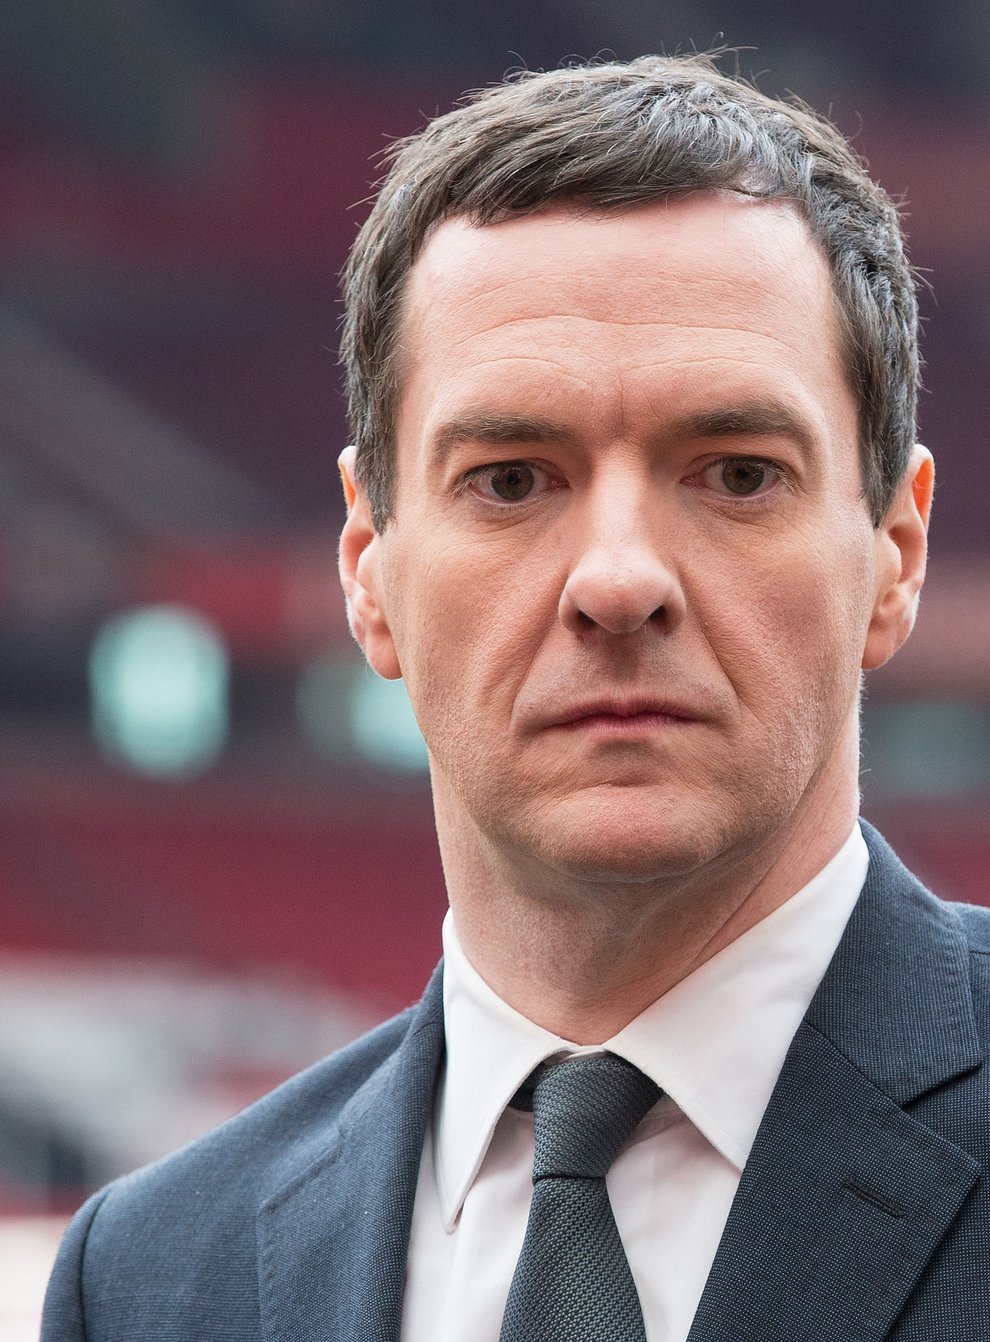 George Osborne, pictured, is understood to have joined forces with Todd Boehly’s bid to buy Chelsea (Ian West/PA)